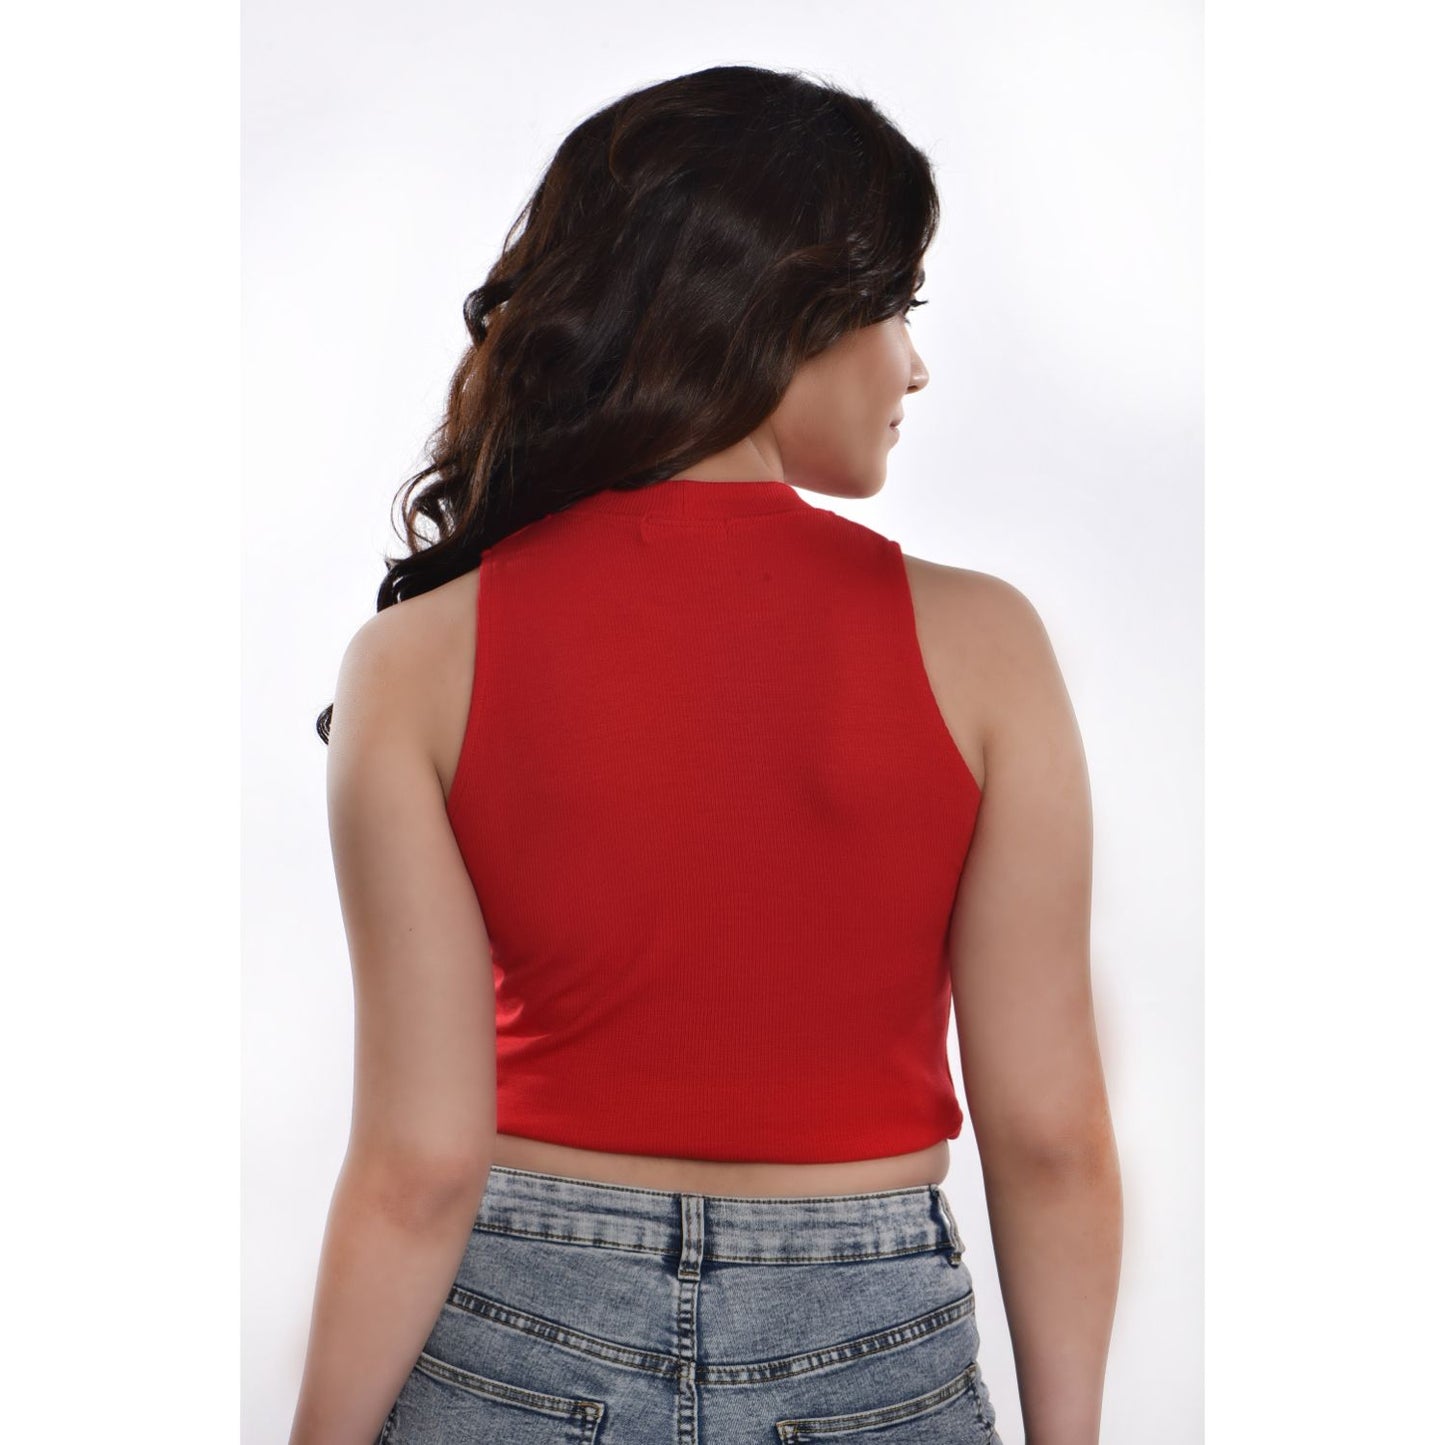 Sleeveless Hosiery Blouses - Red - Blouse featured